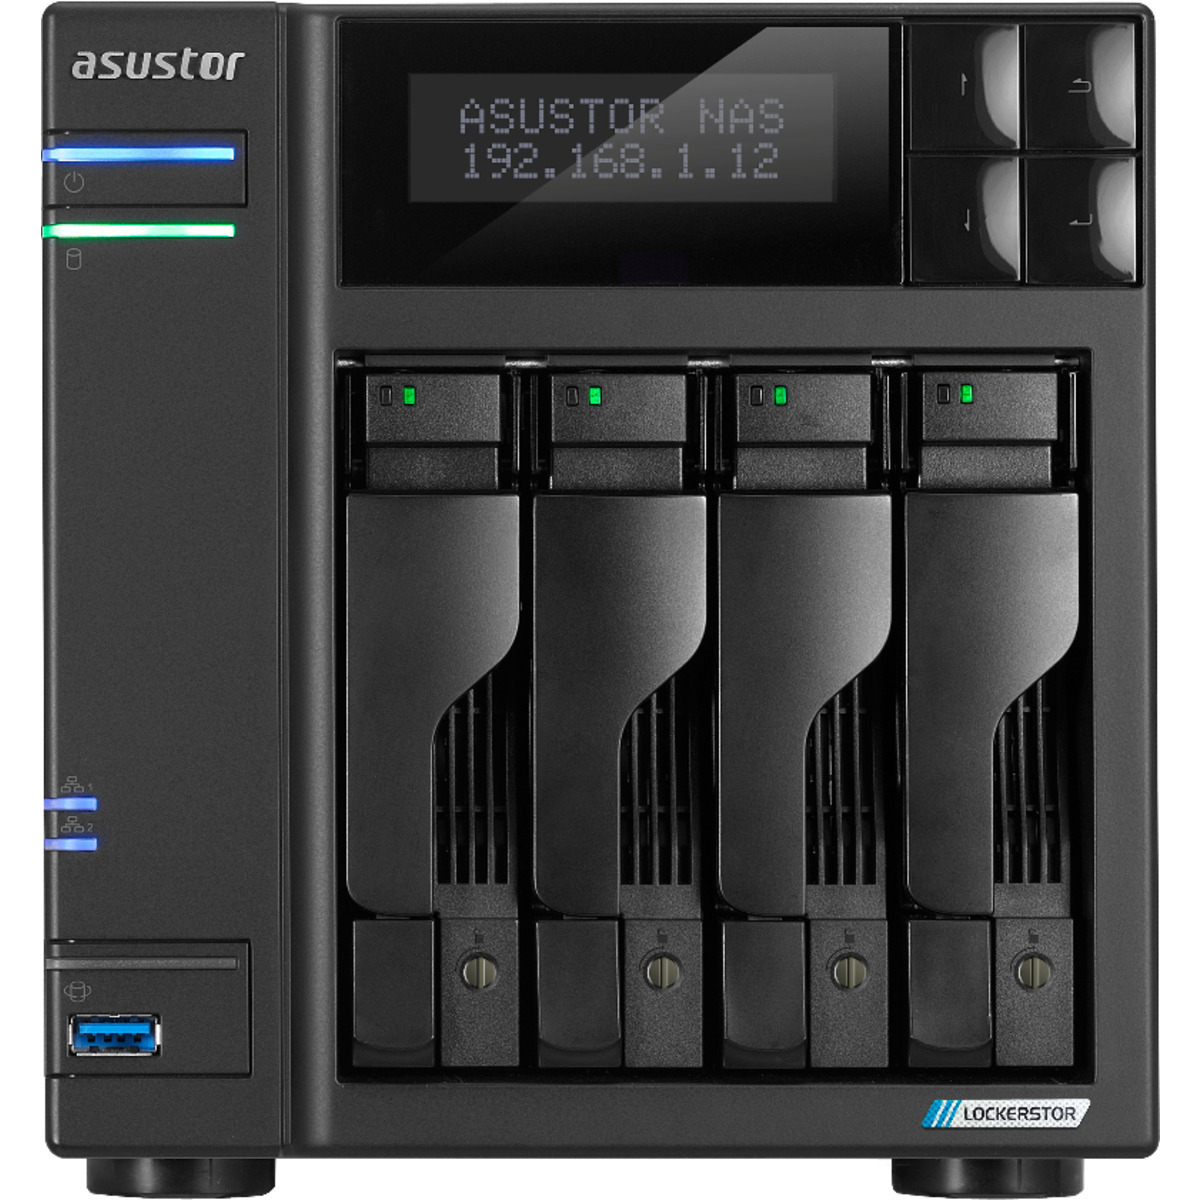 ASUSTOR LOCKERSTOR 4 Gen2 AS6704T 64tb 4-Bay Desktop Multimedia / Power User / Business NAS - Network Attached Storage Device 4x16tb Seagate IronWolf Pro ST16000NT001 3.5 7200rpm SATA 6Gb/s HDD NAS Class Drives Installed - Burn-In Tested - ON SALE - FREE RAM UPGRADE LOCKERSTOR 4 Gen2 AS6704T